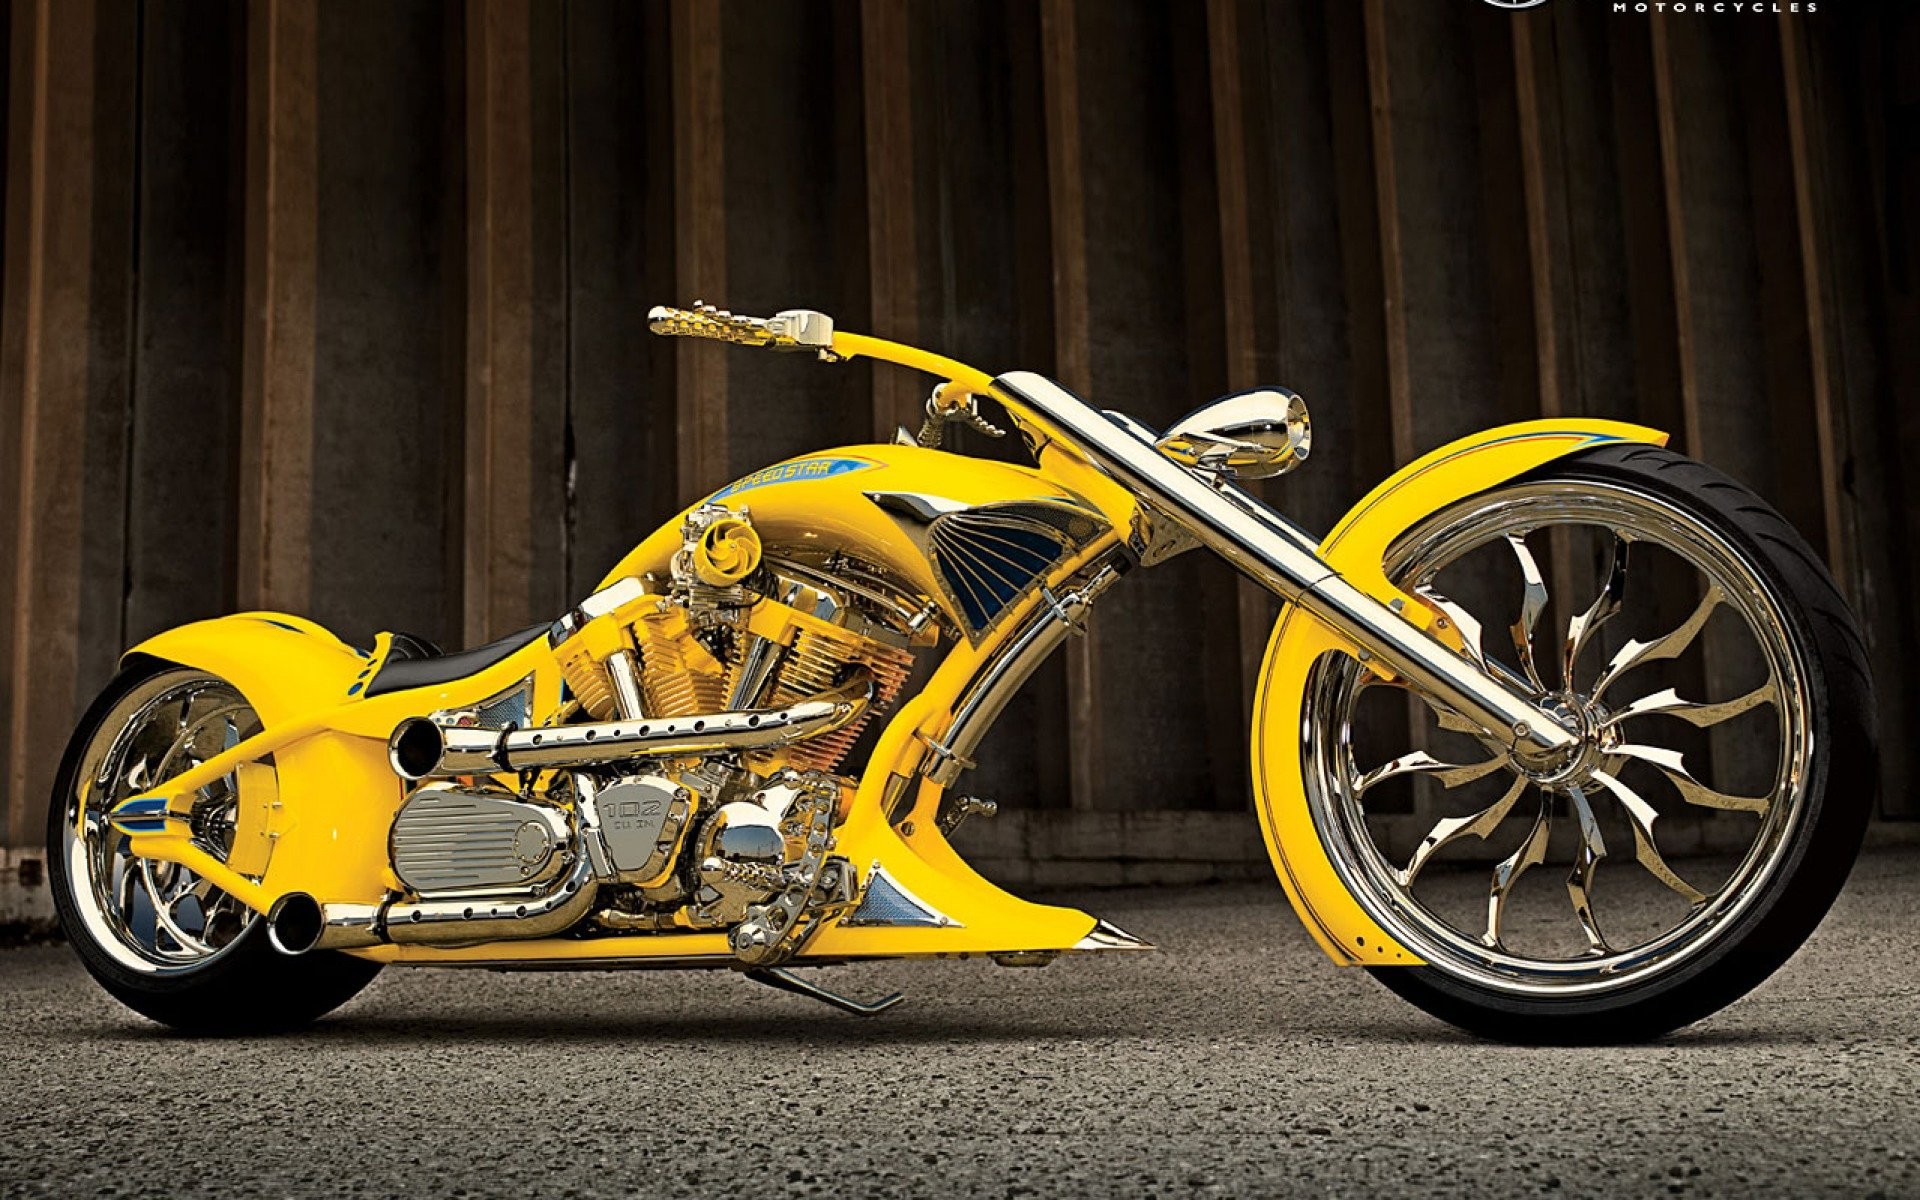  Chopper  Motorcycle Wallpapers   WallpaperTag